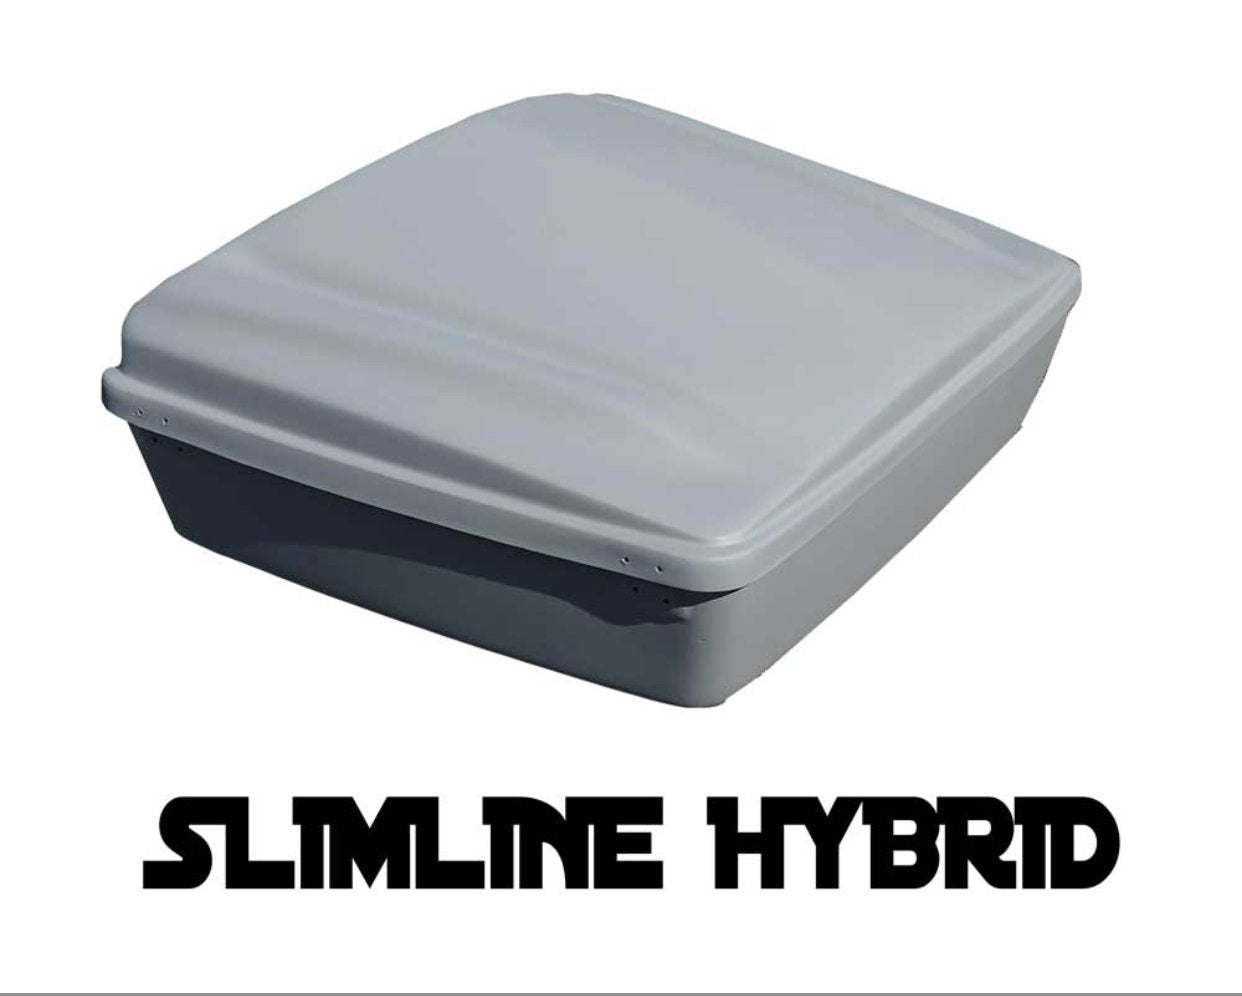 Motorcycle Trunk - The "Slimline HYBRID" Razor Tour Pack is Universal Fitment (Height 10")